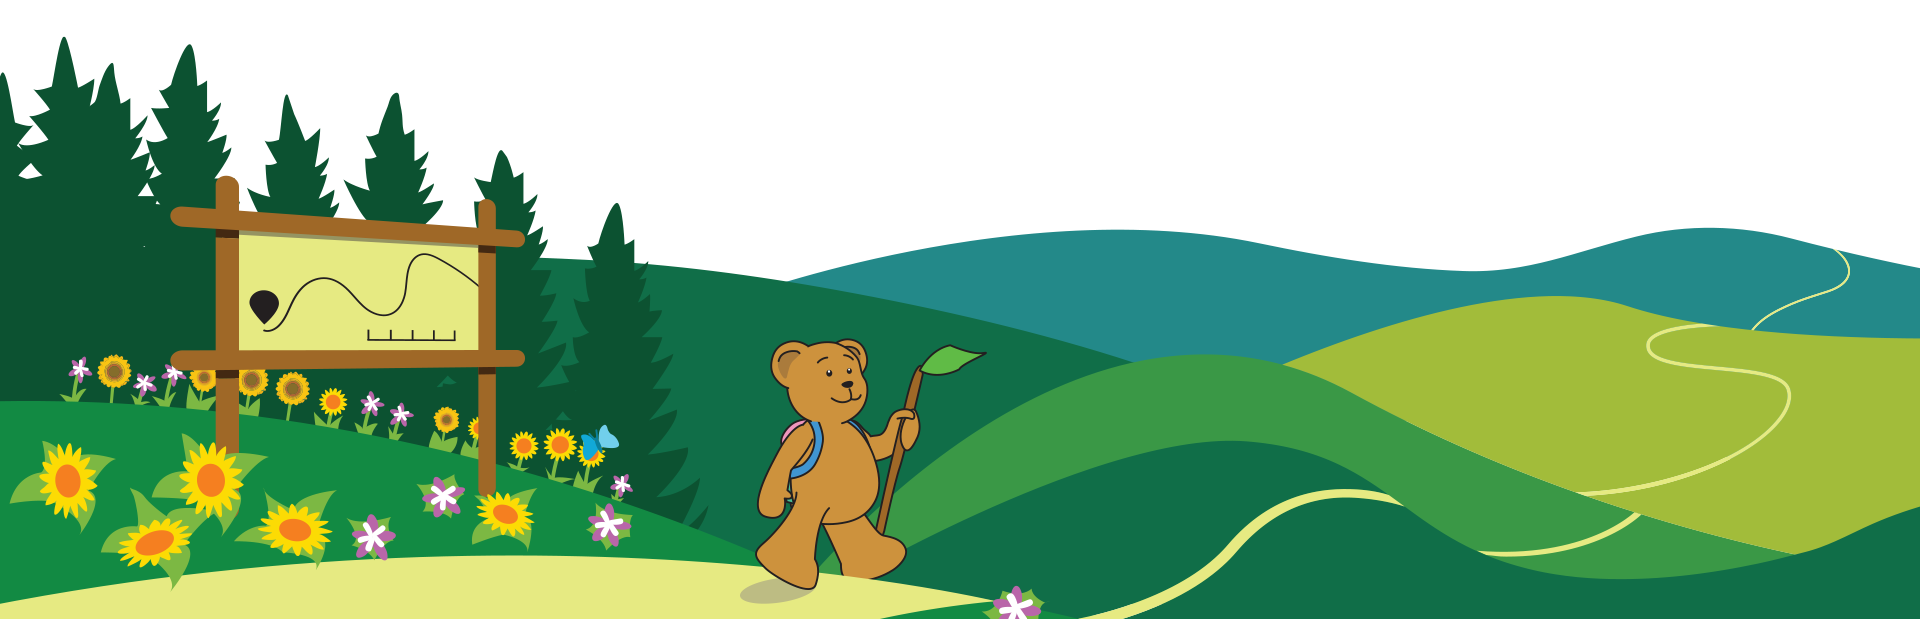 Backpack Bear at the beginning of a journey